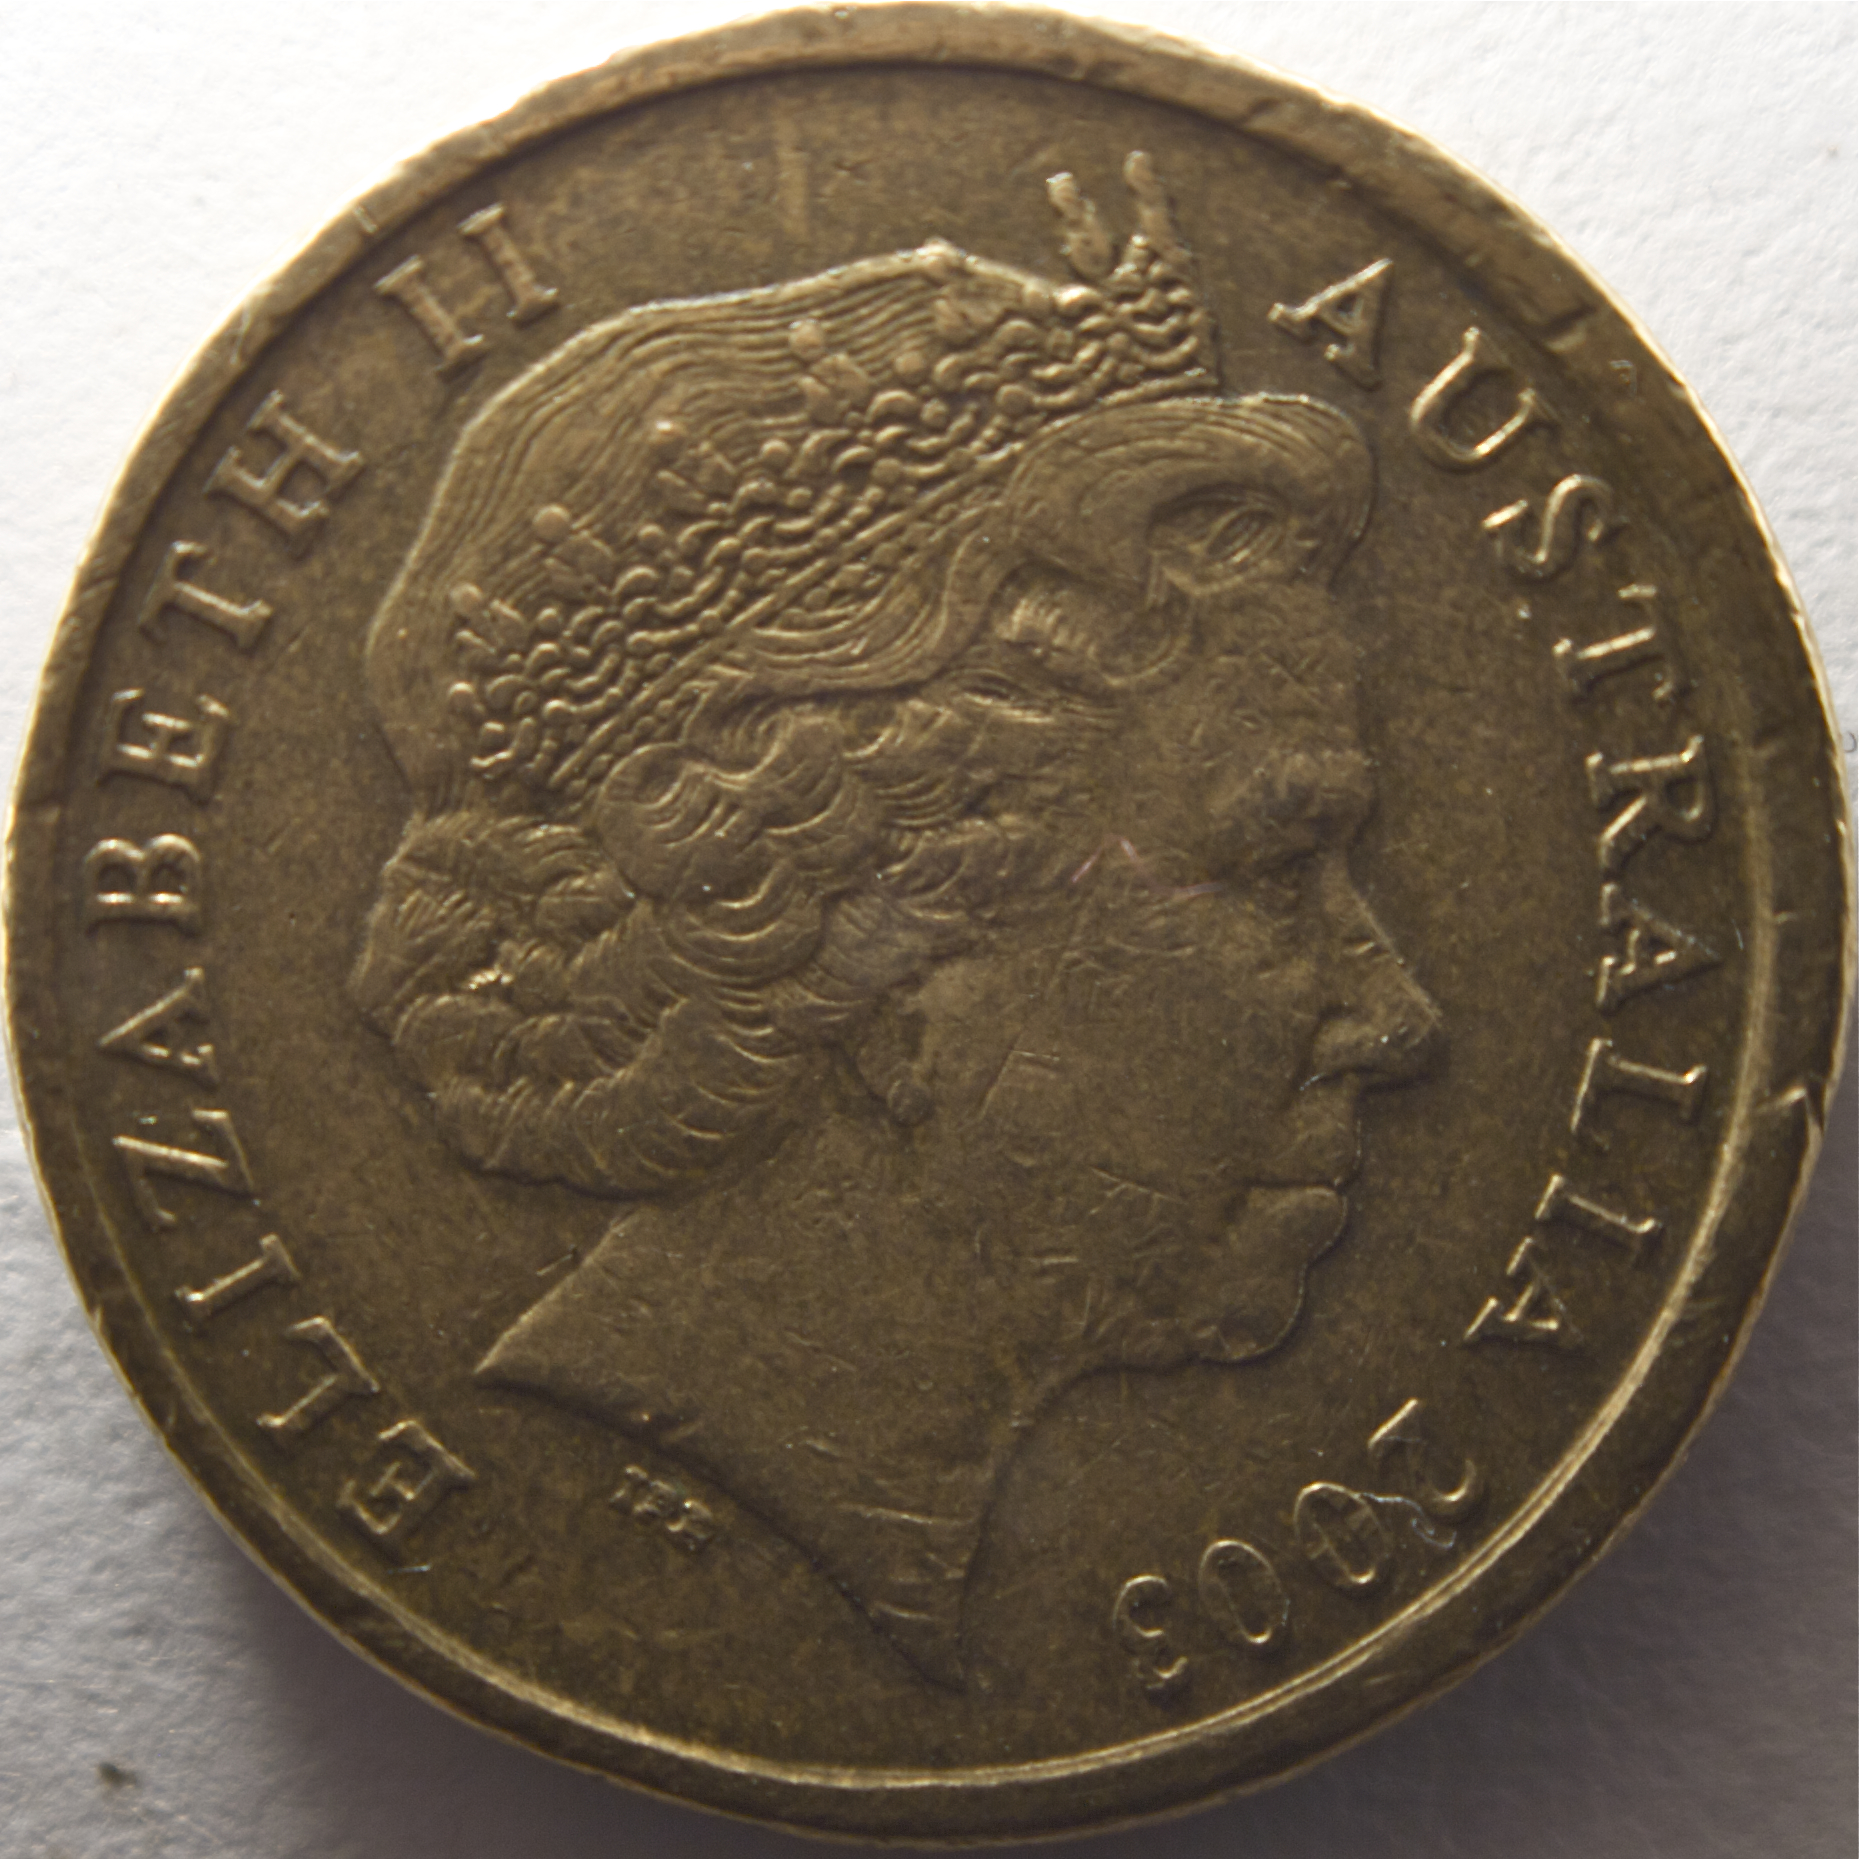 the coin has the image of a woman with long hair